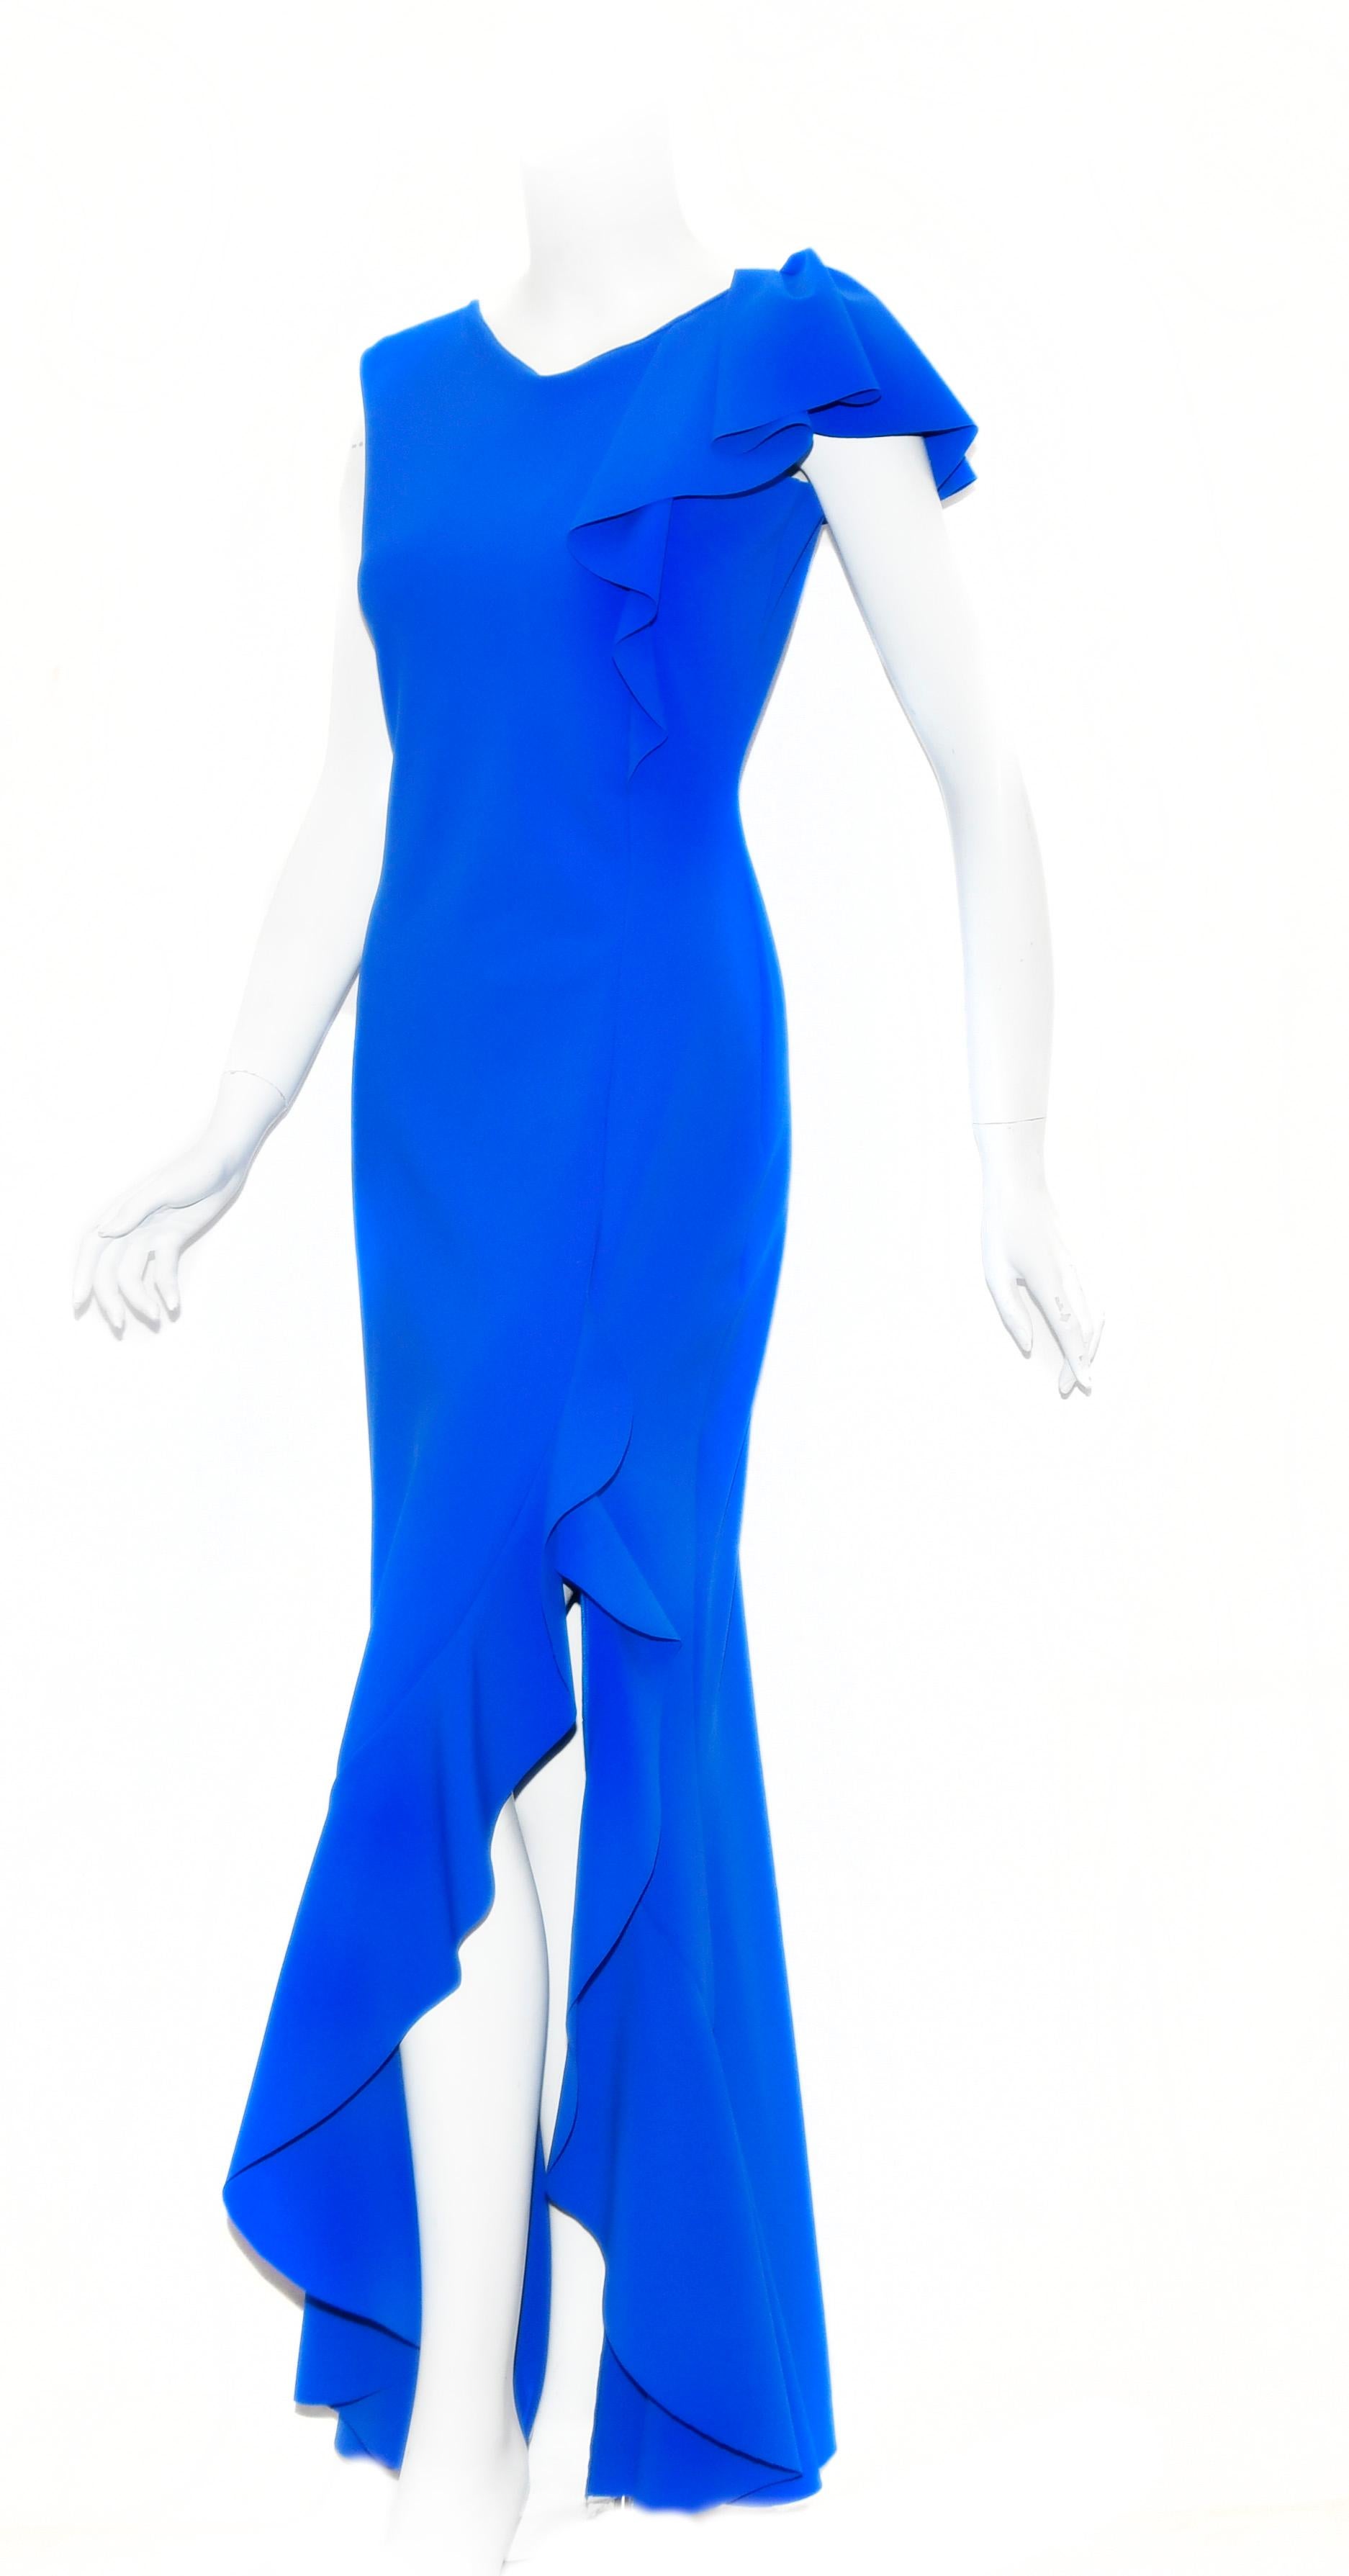 Chiara Boni royal blue Chitra asymmetric ruffle evening sheath gown has ruffles on one side of shoulder descending to the waist.  This dress incorporates a high slit at front with ruffles increasing in size down to the hem.  This suggestive dress is